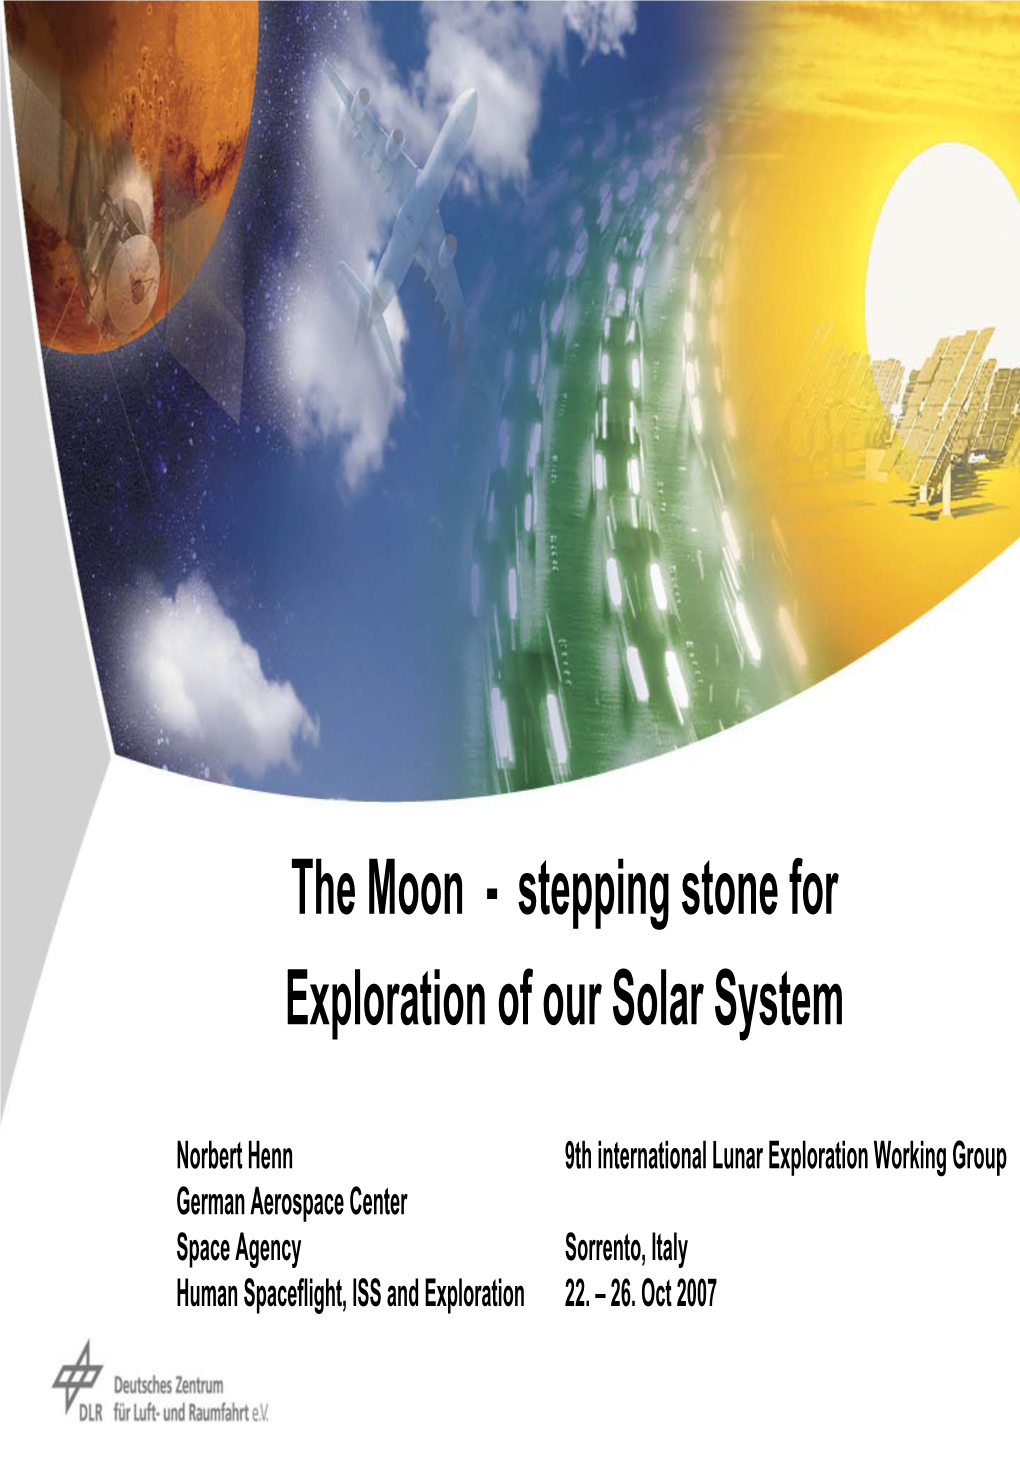 The Moon - Stepping Stone for Exploration of Our Solar System